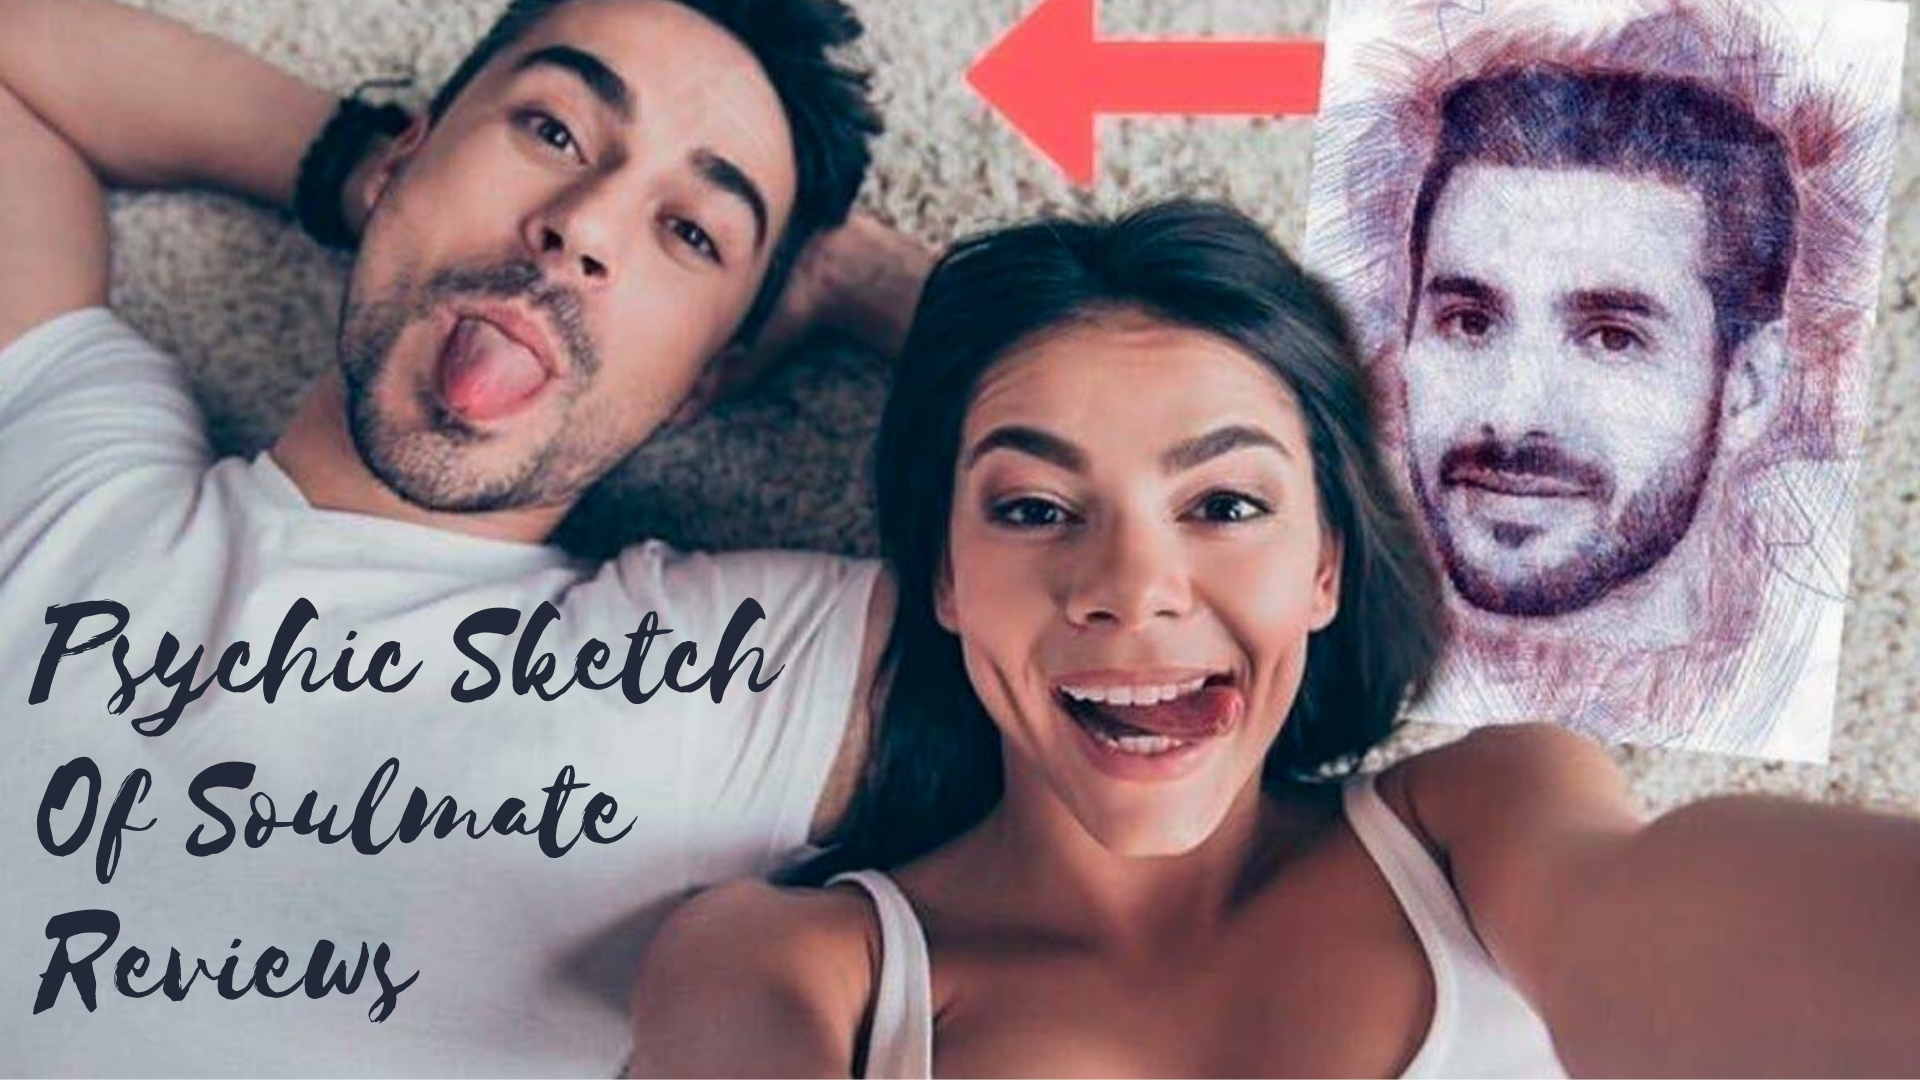 A happy couple having a selfie photo with a sketch drawing